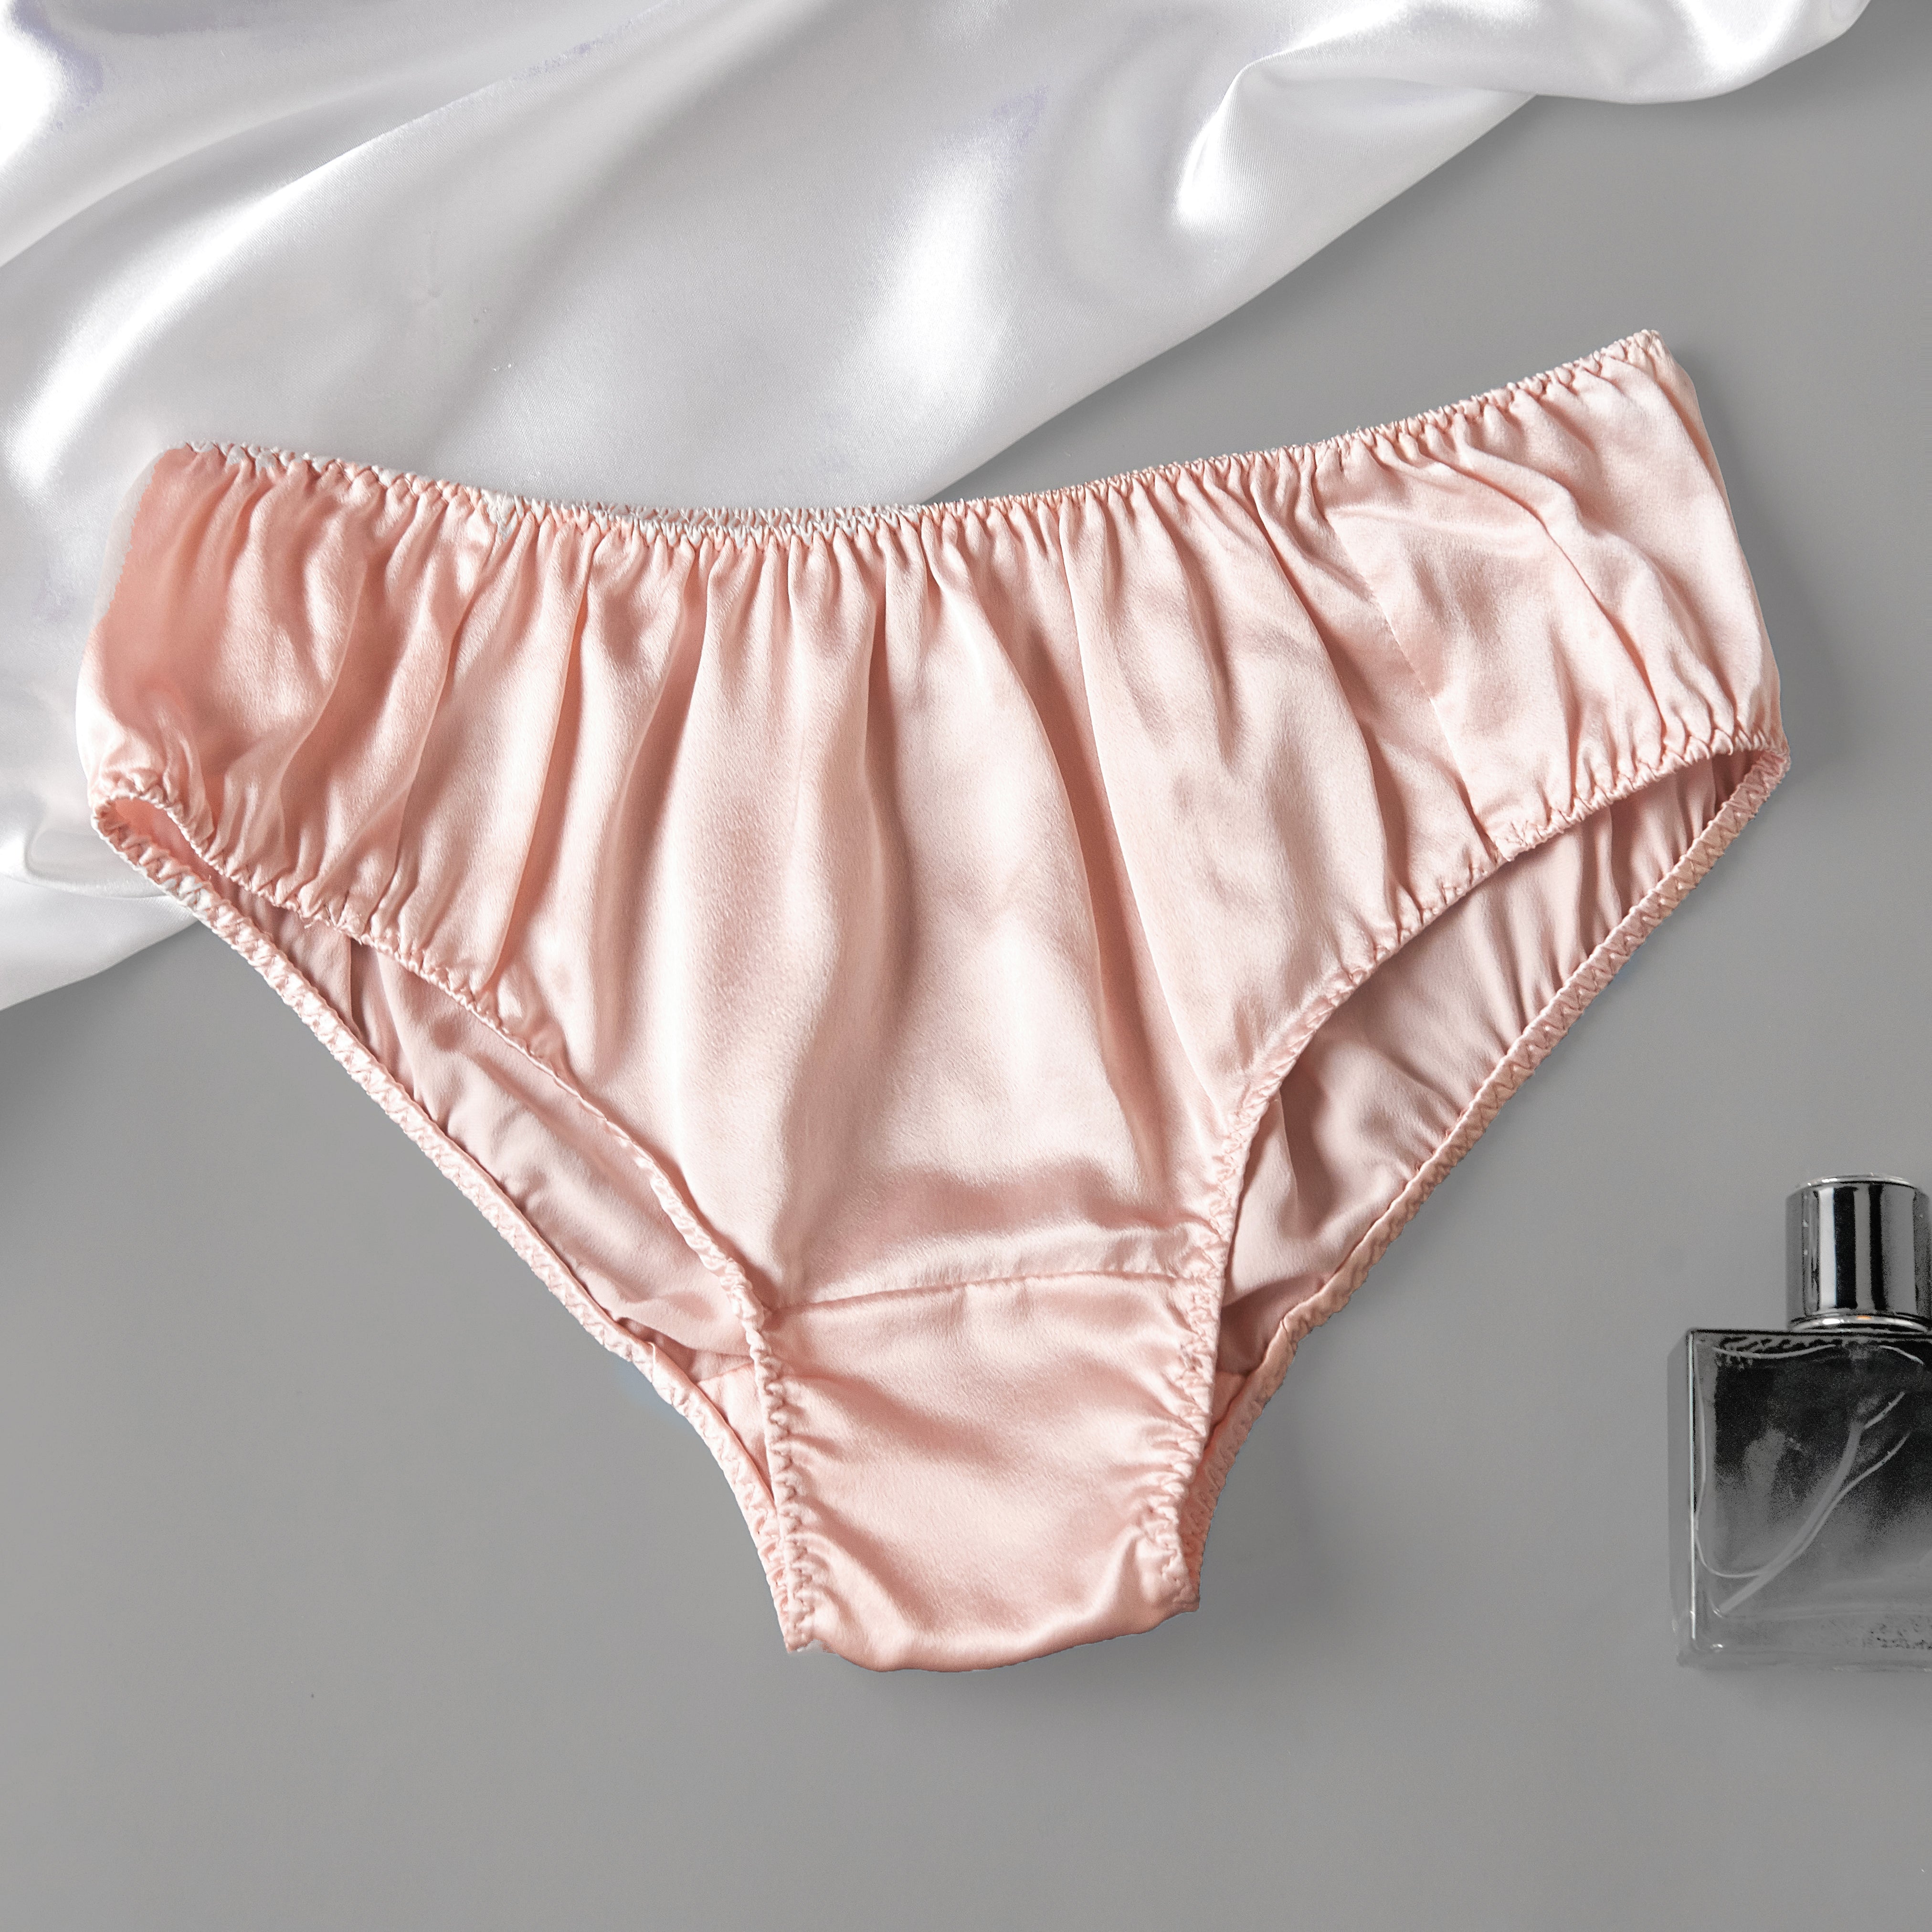 Period Underwear, Hand Care & Masks – Happy Natural Products Canada